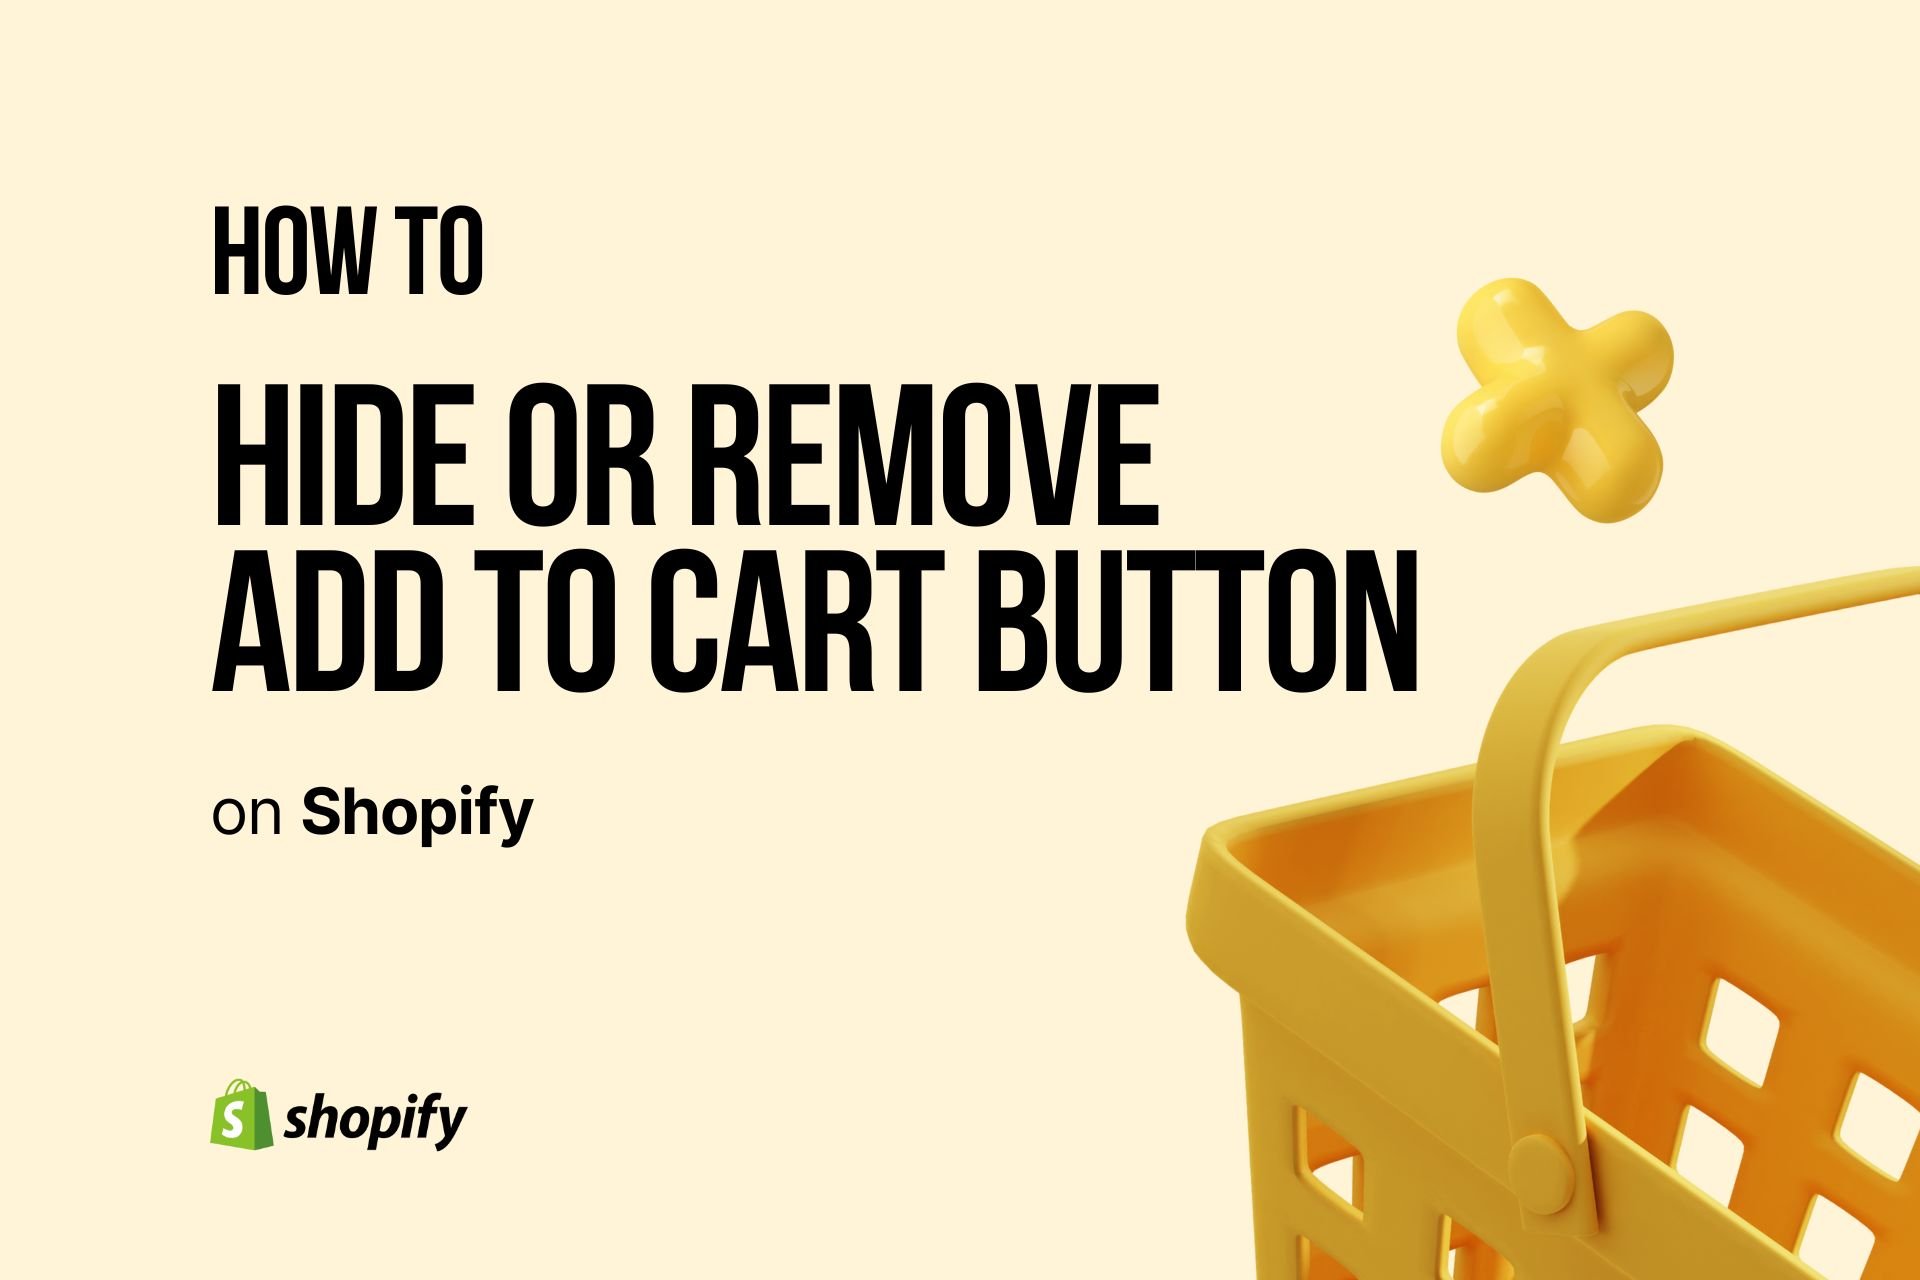 How to Hide or Remove ‘Add to Cart’ Button on Shopify